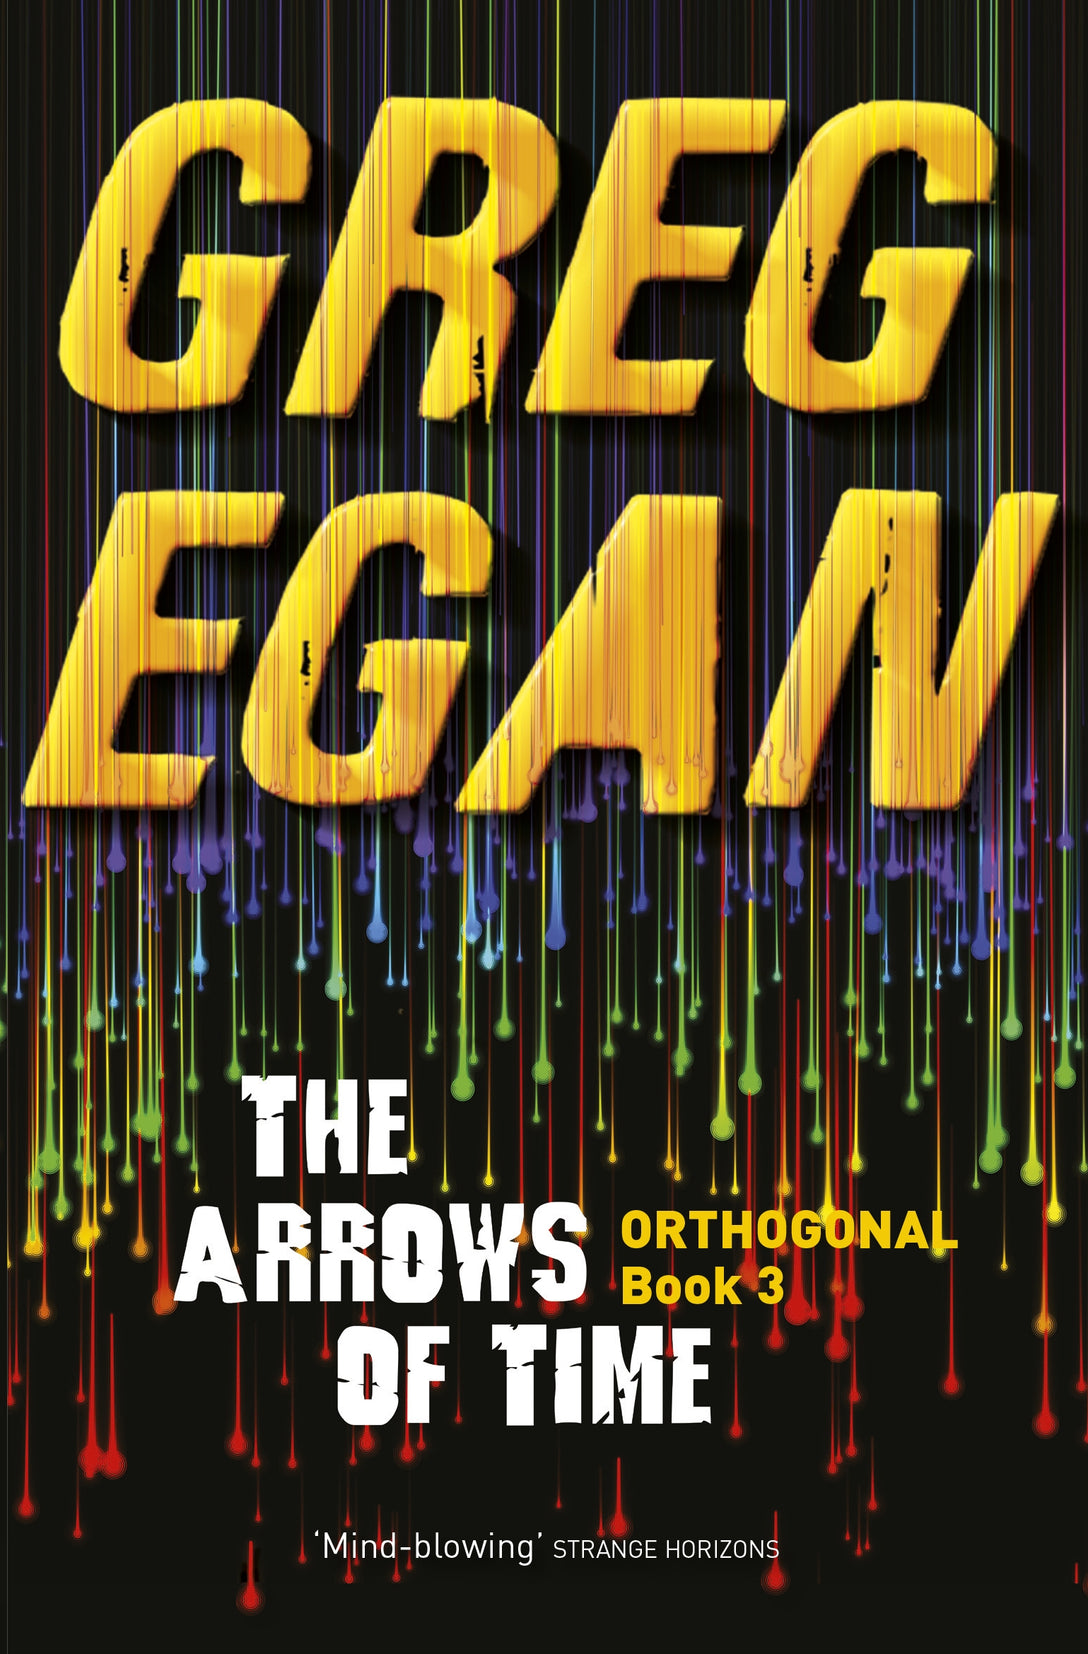 The Arrows of Time by Greg Egan